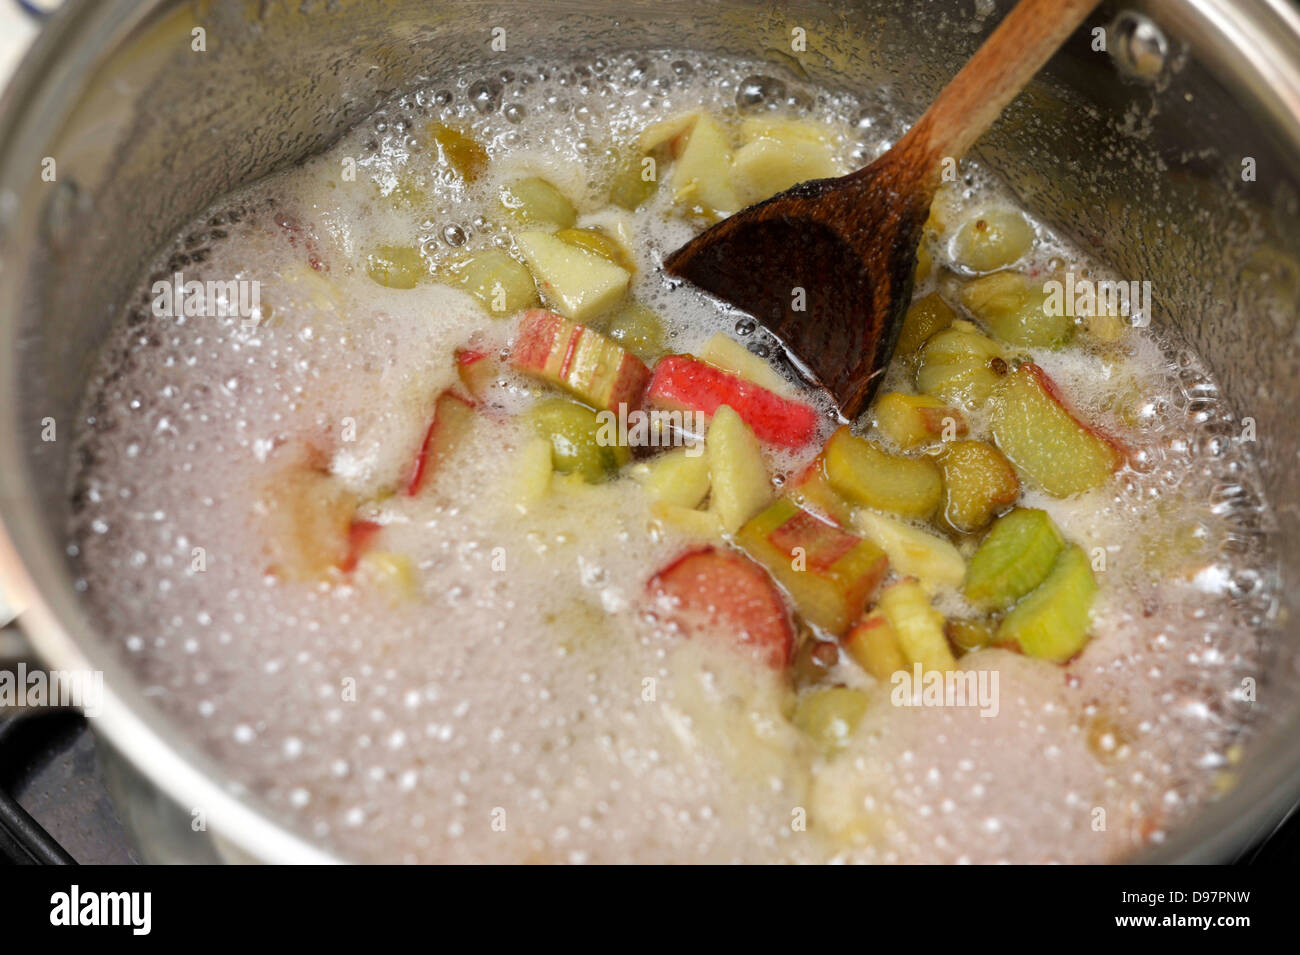 Homemade jam making with rhubarb, gooseberries and a little apple coming to the boil. Stock Photo